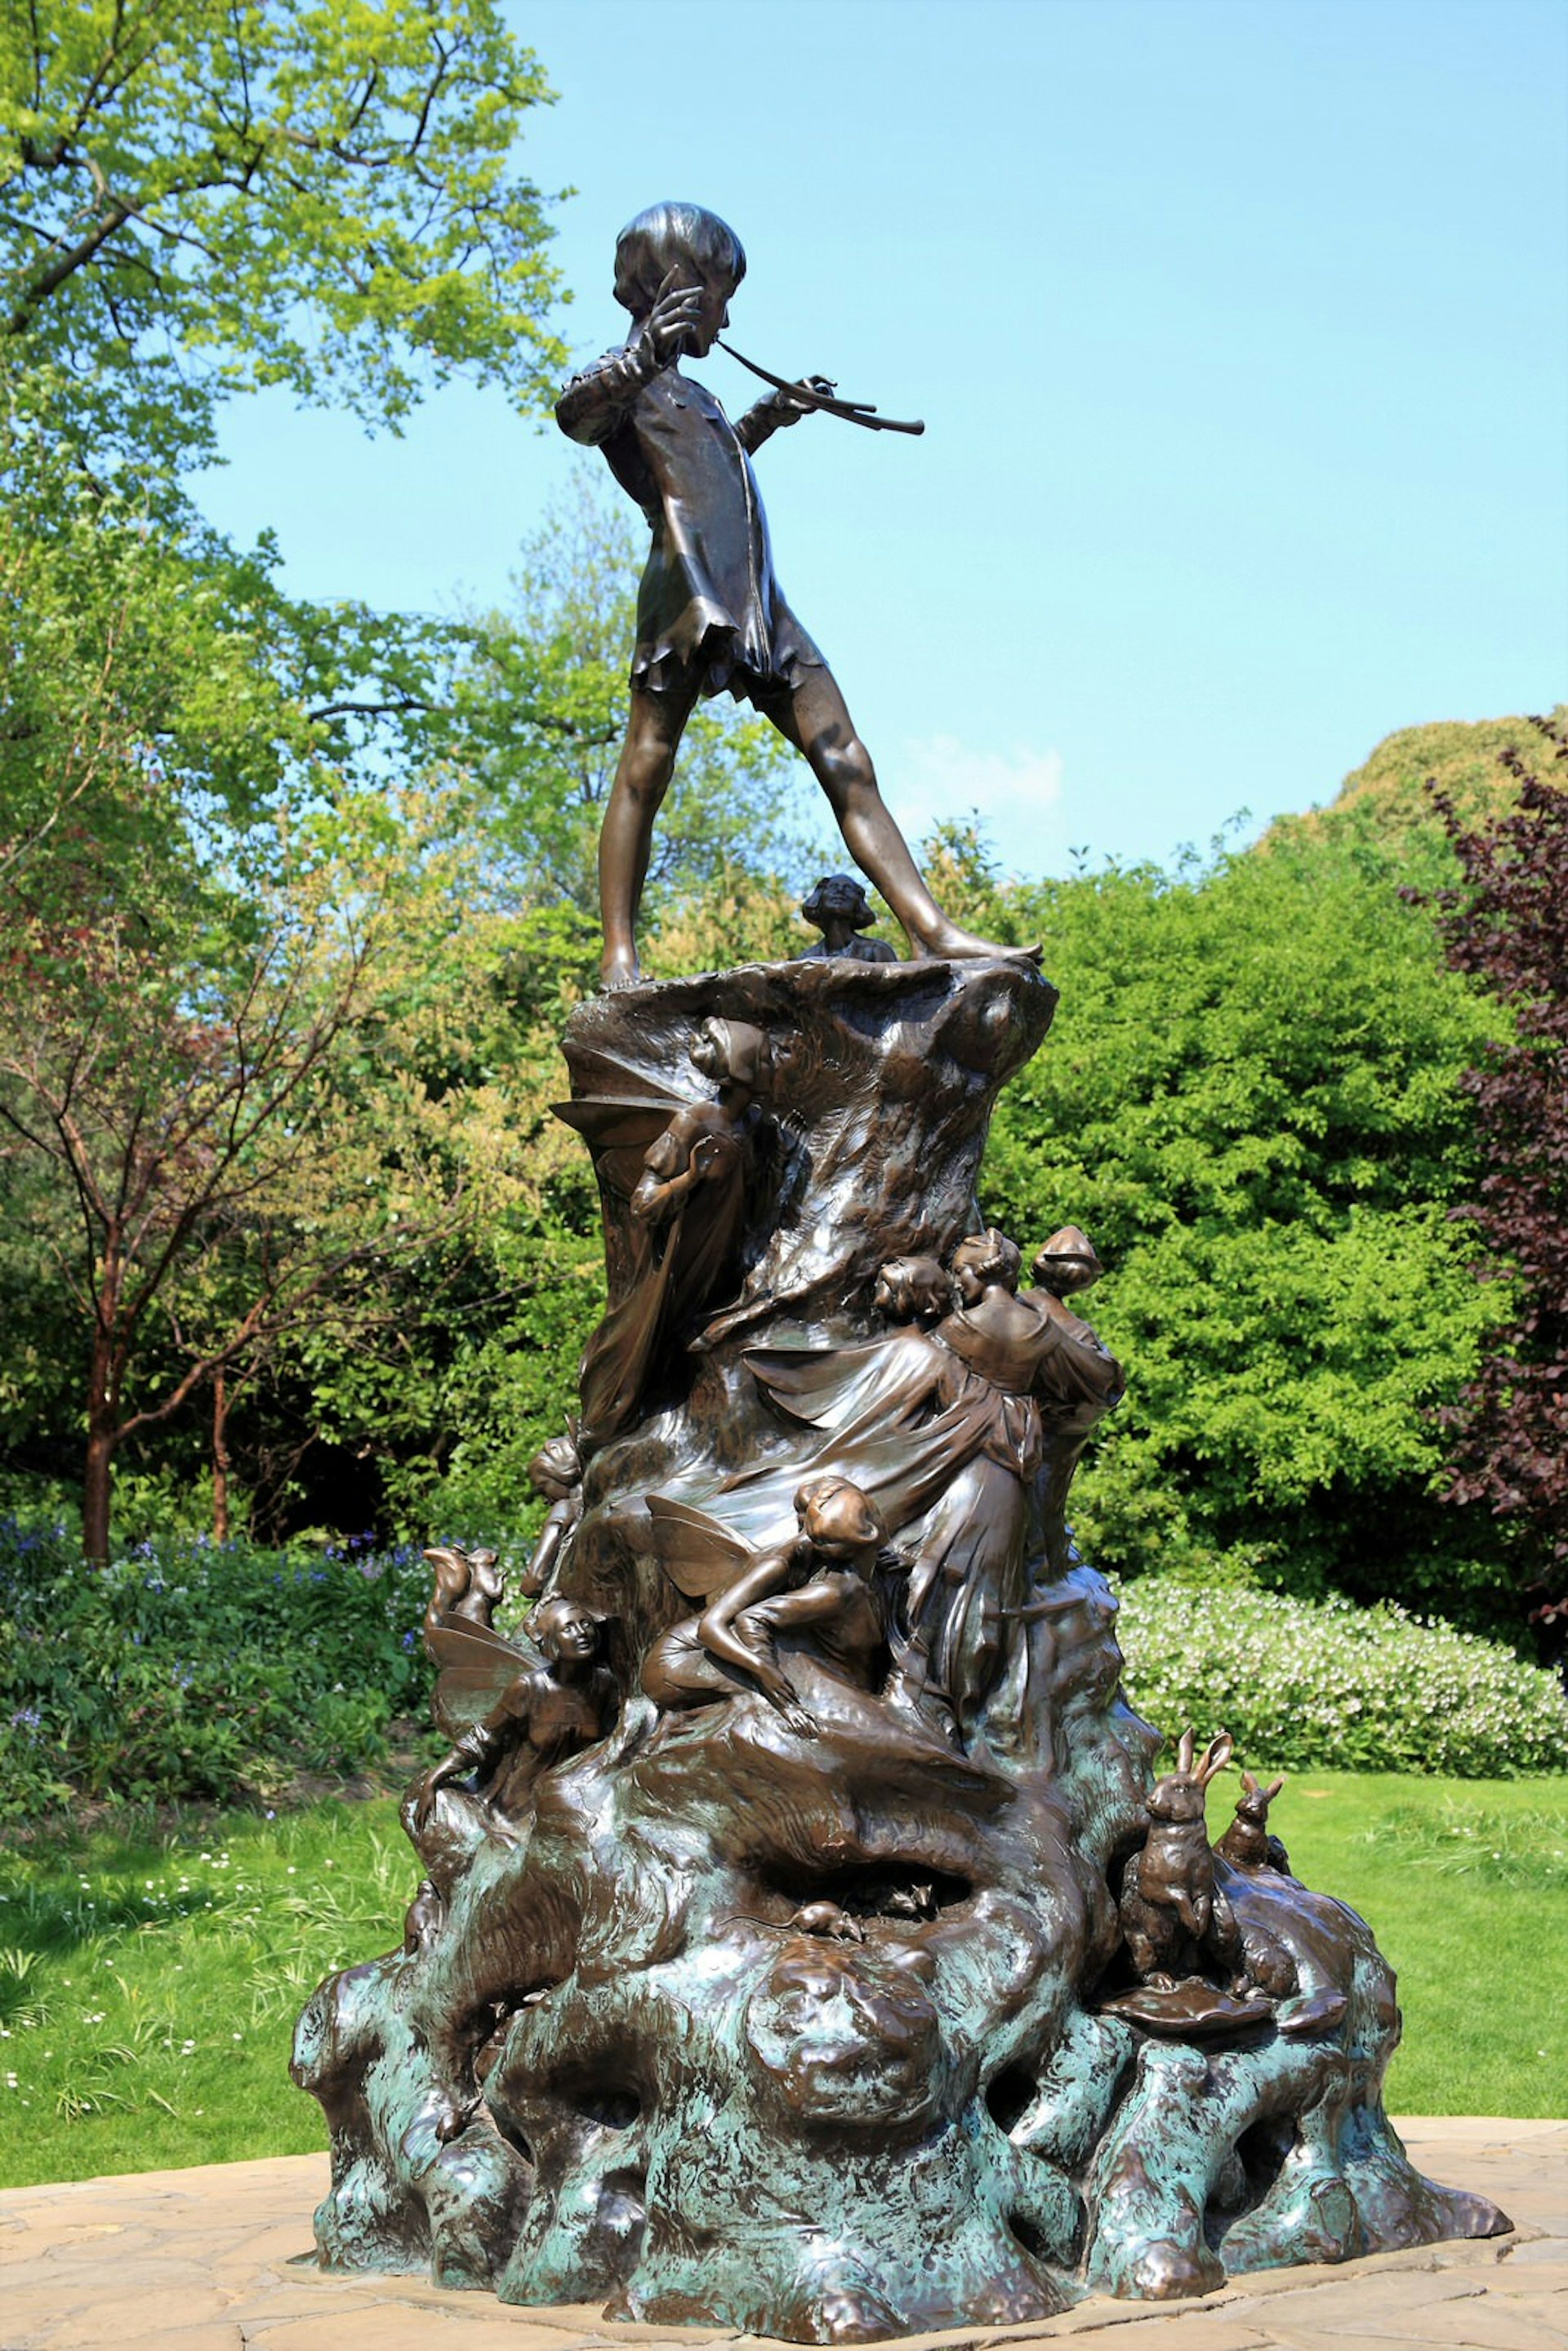 The tall statue of Peter Pan stands amid the greenery of Kensington Gardens in London